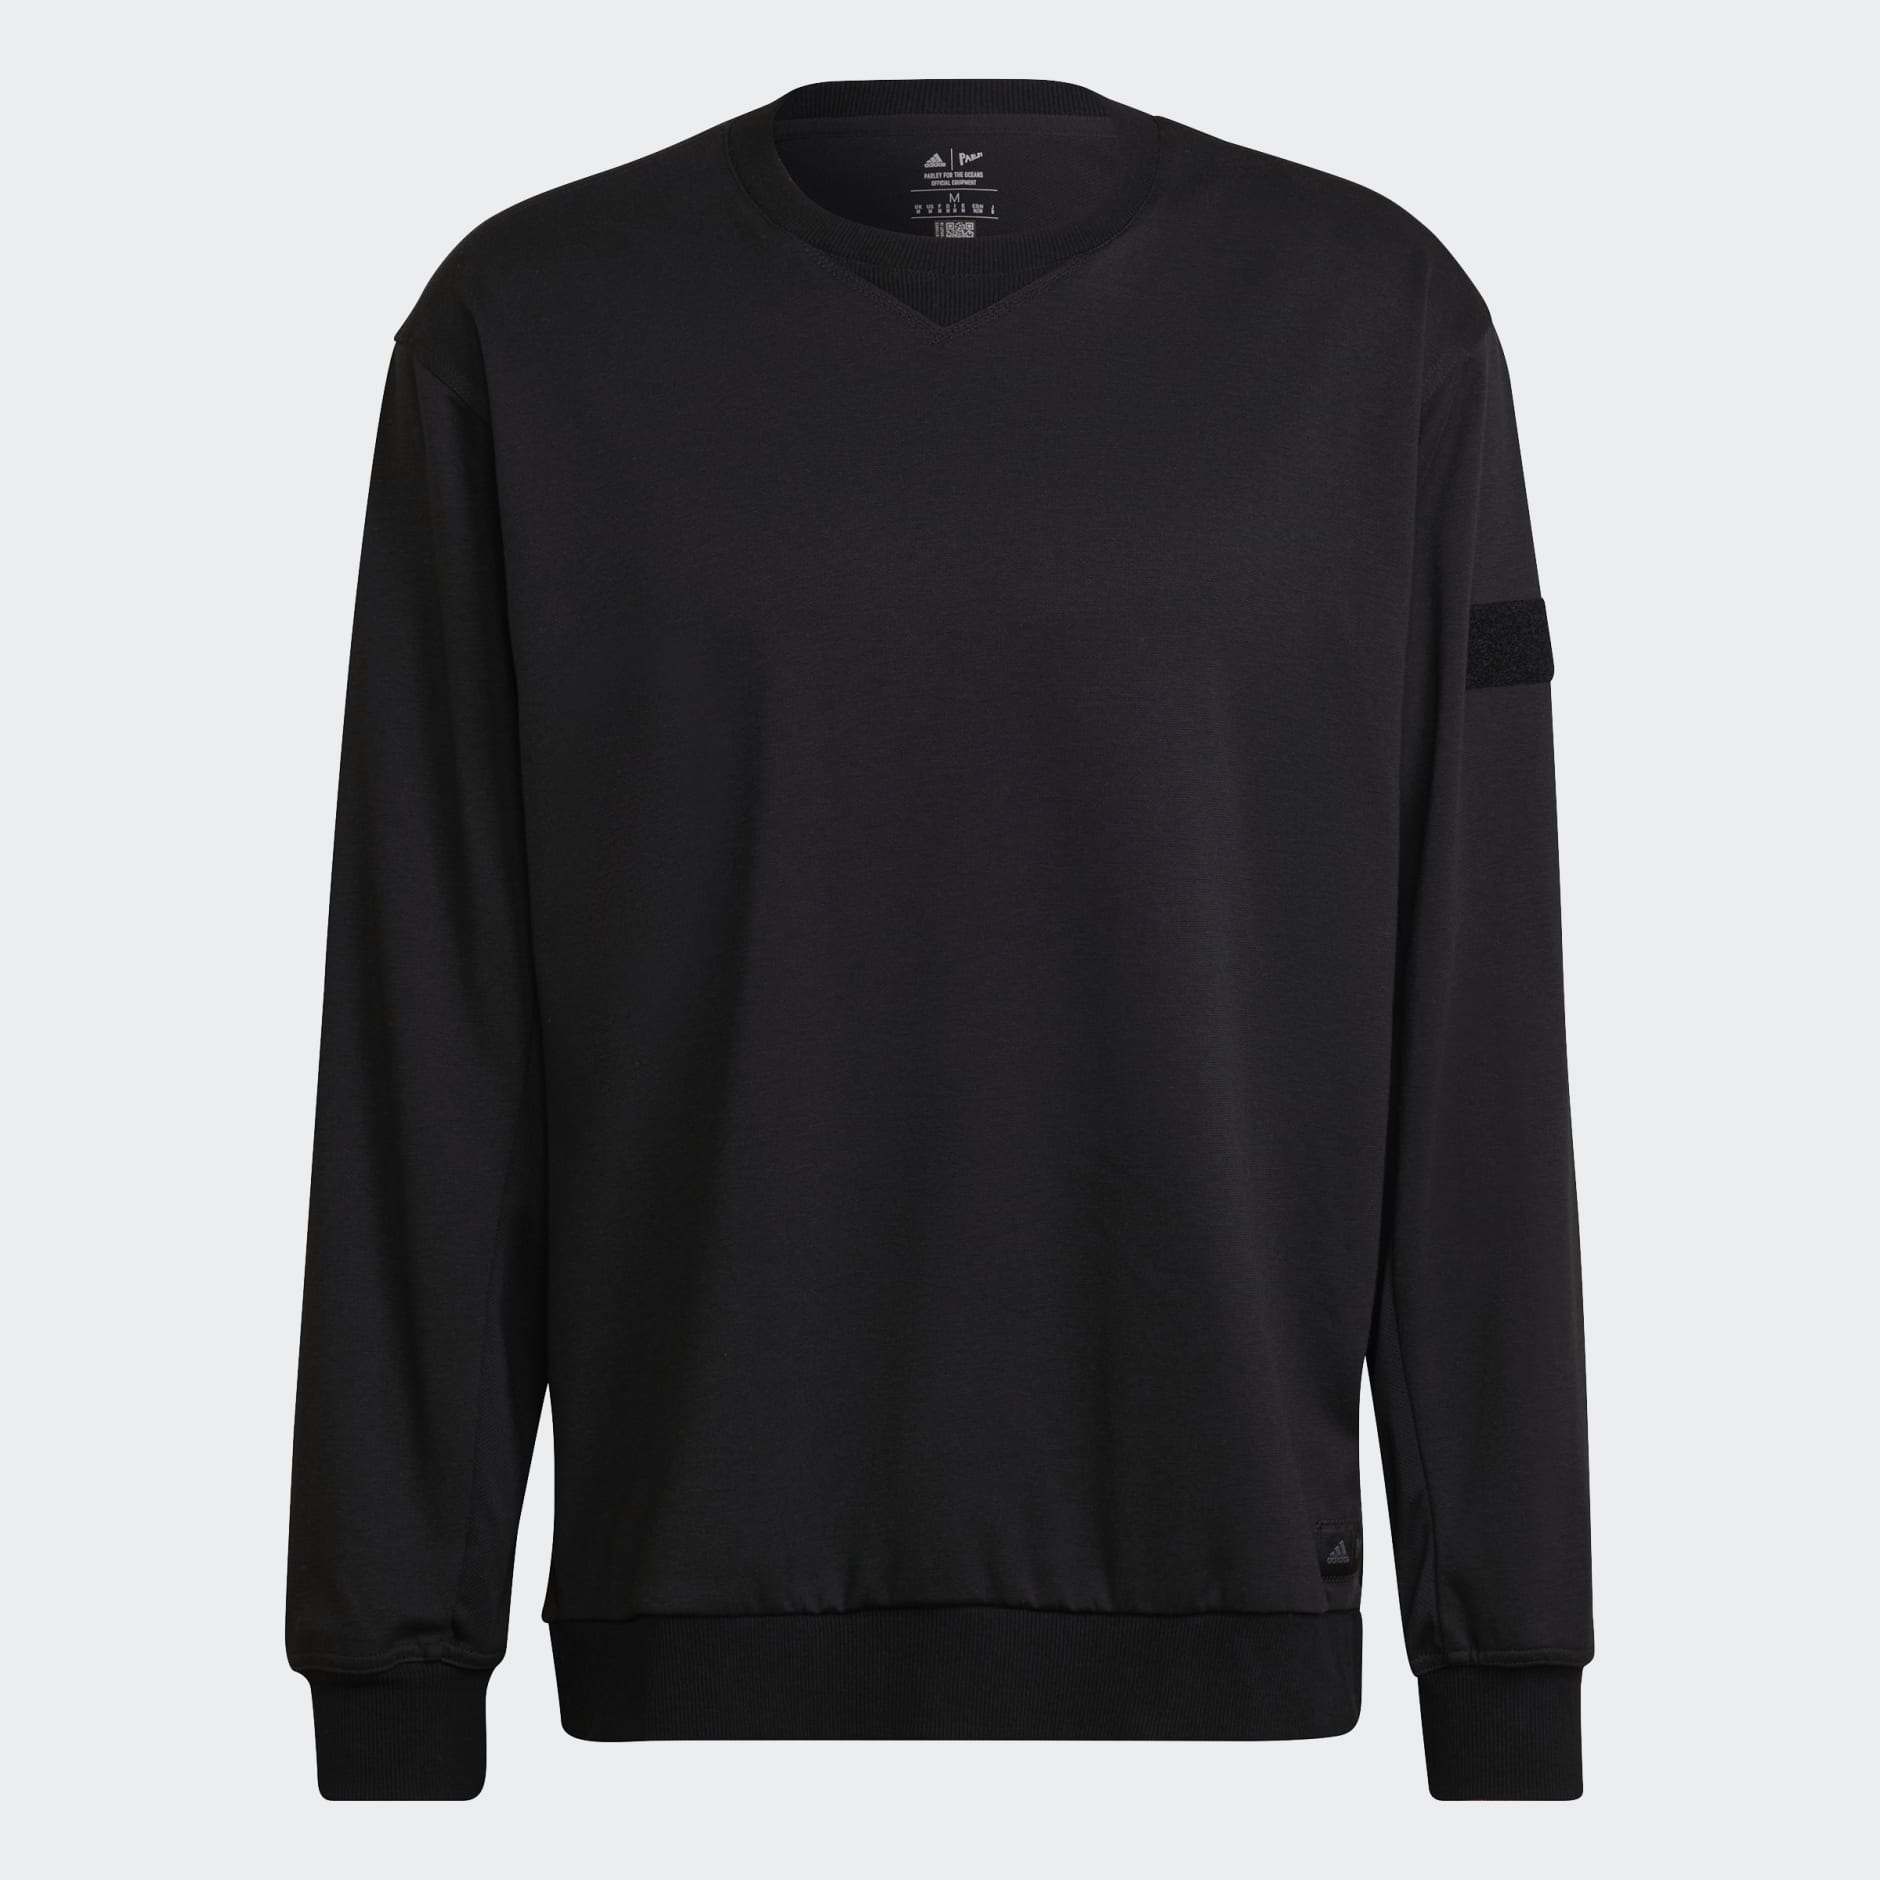 Clothing - Parley Run for the Oceans Sweatshirt - Black | adidas South ...